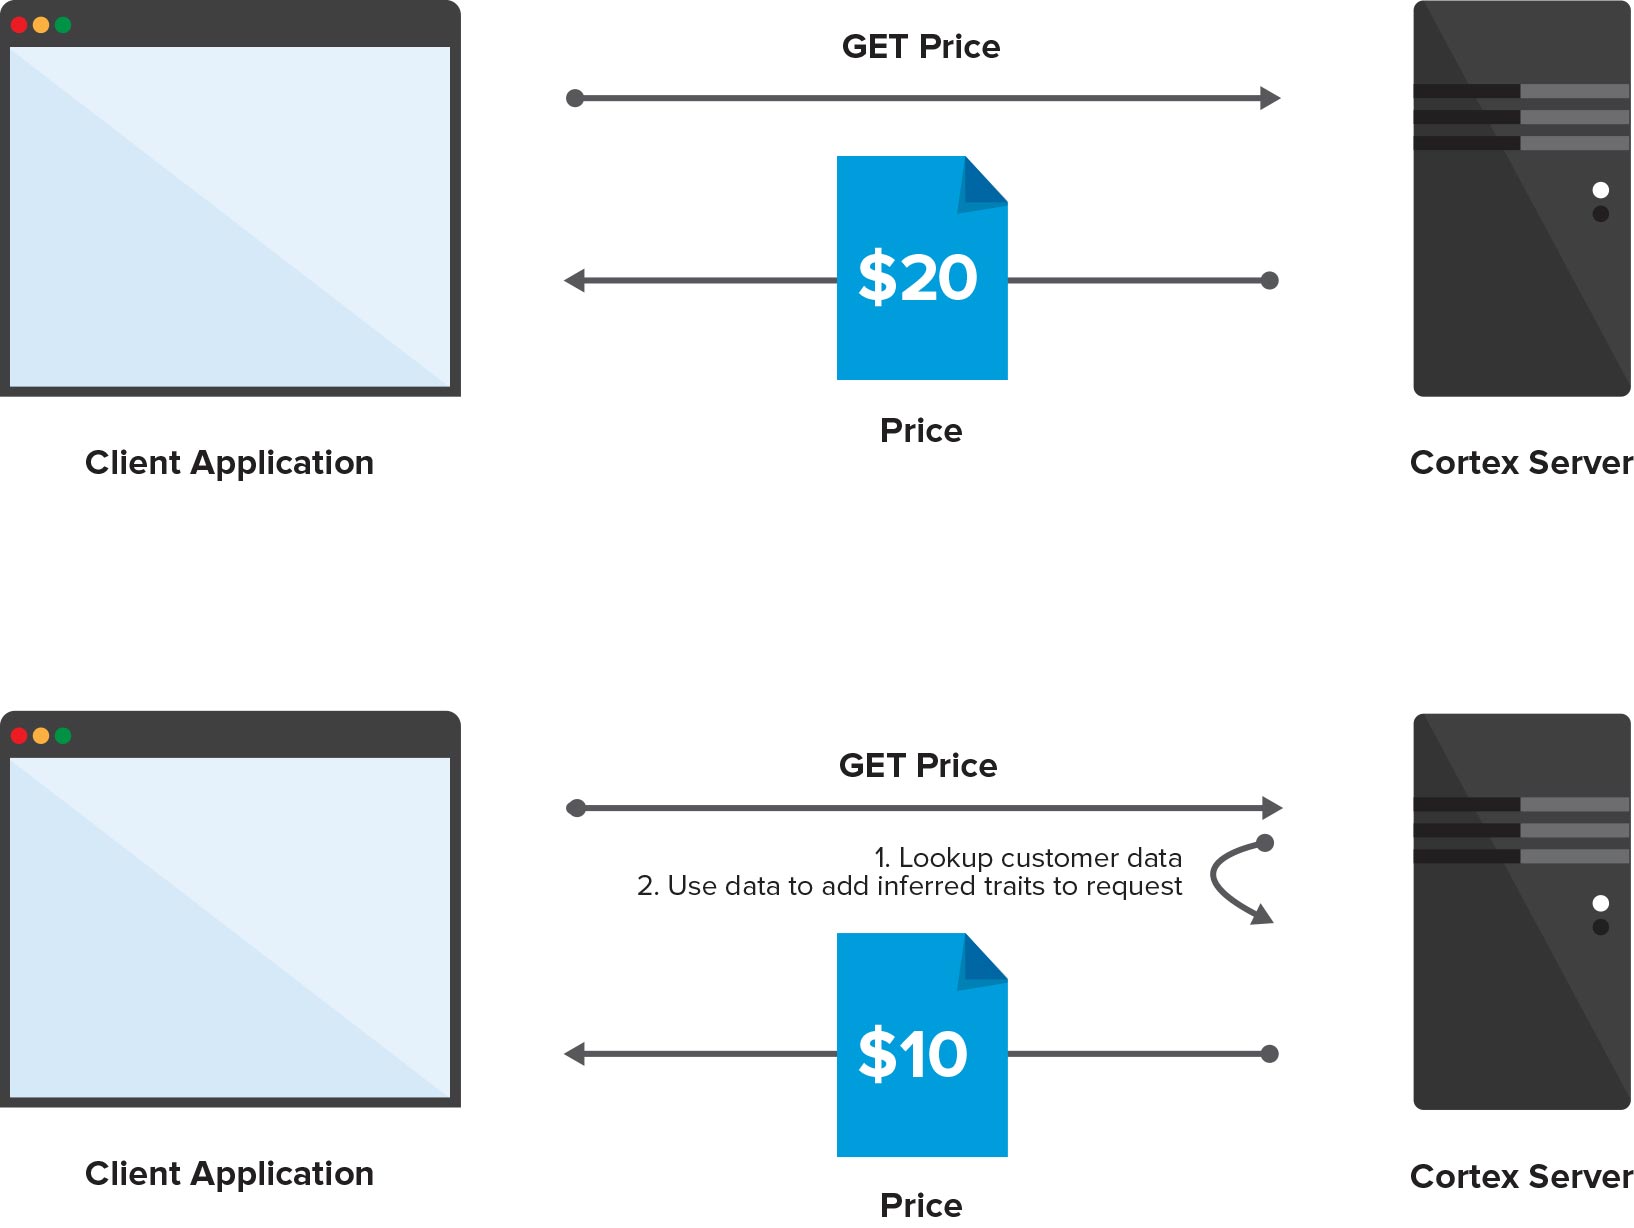 Pricing affected by shopper's traits inferred from Commerce Engine data